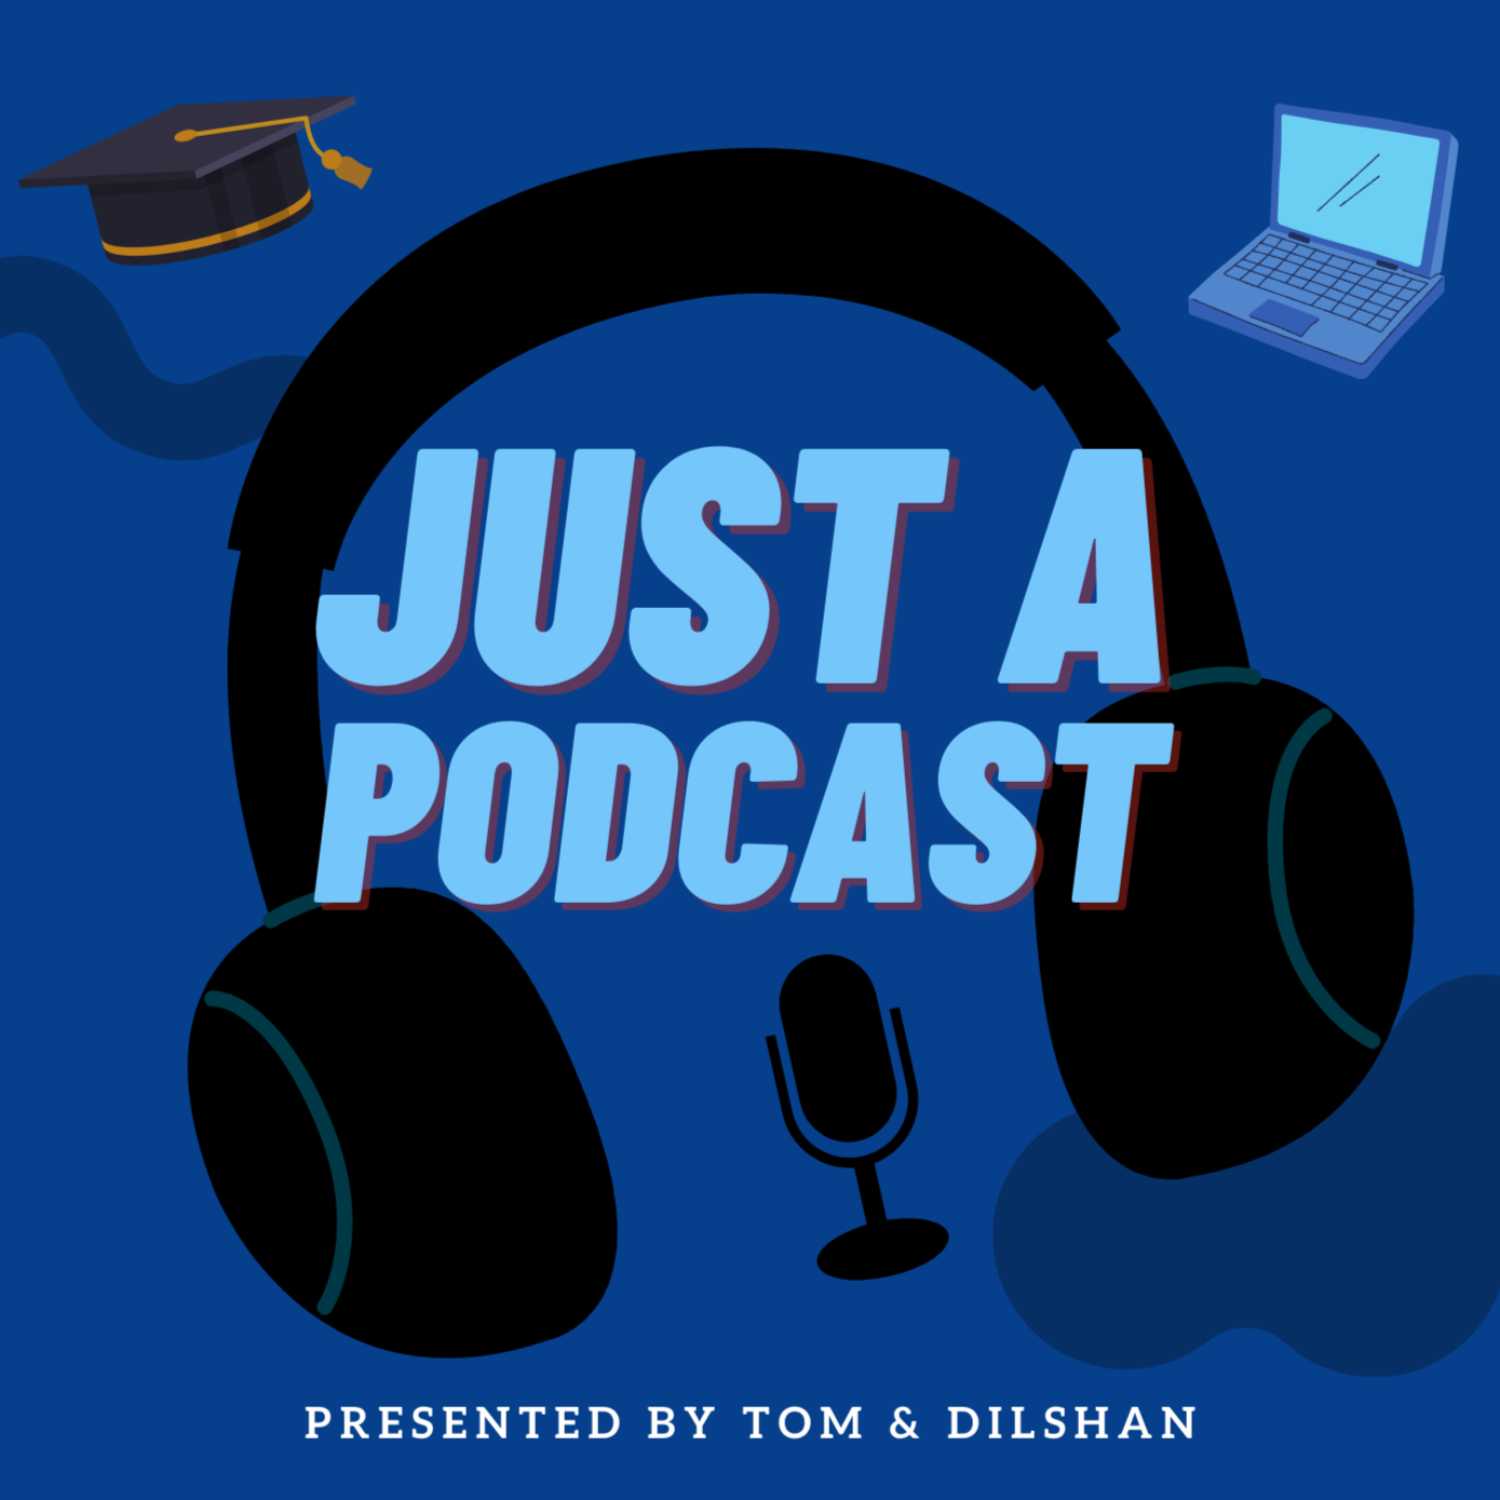 Just a Podcast